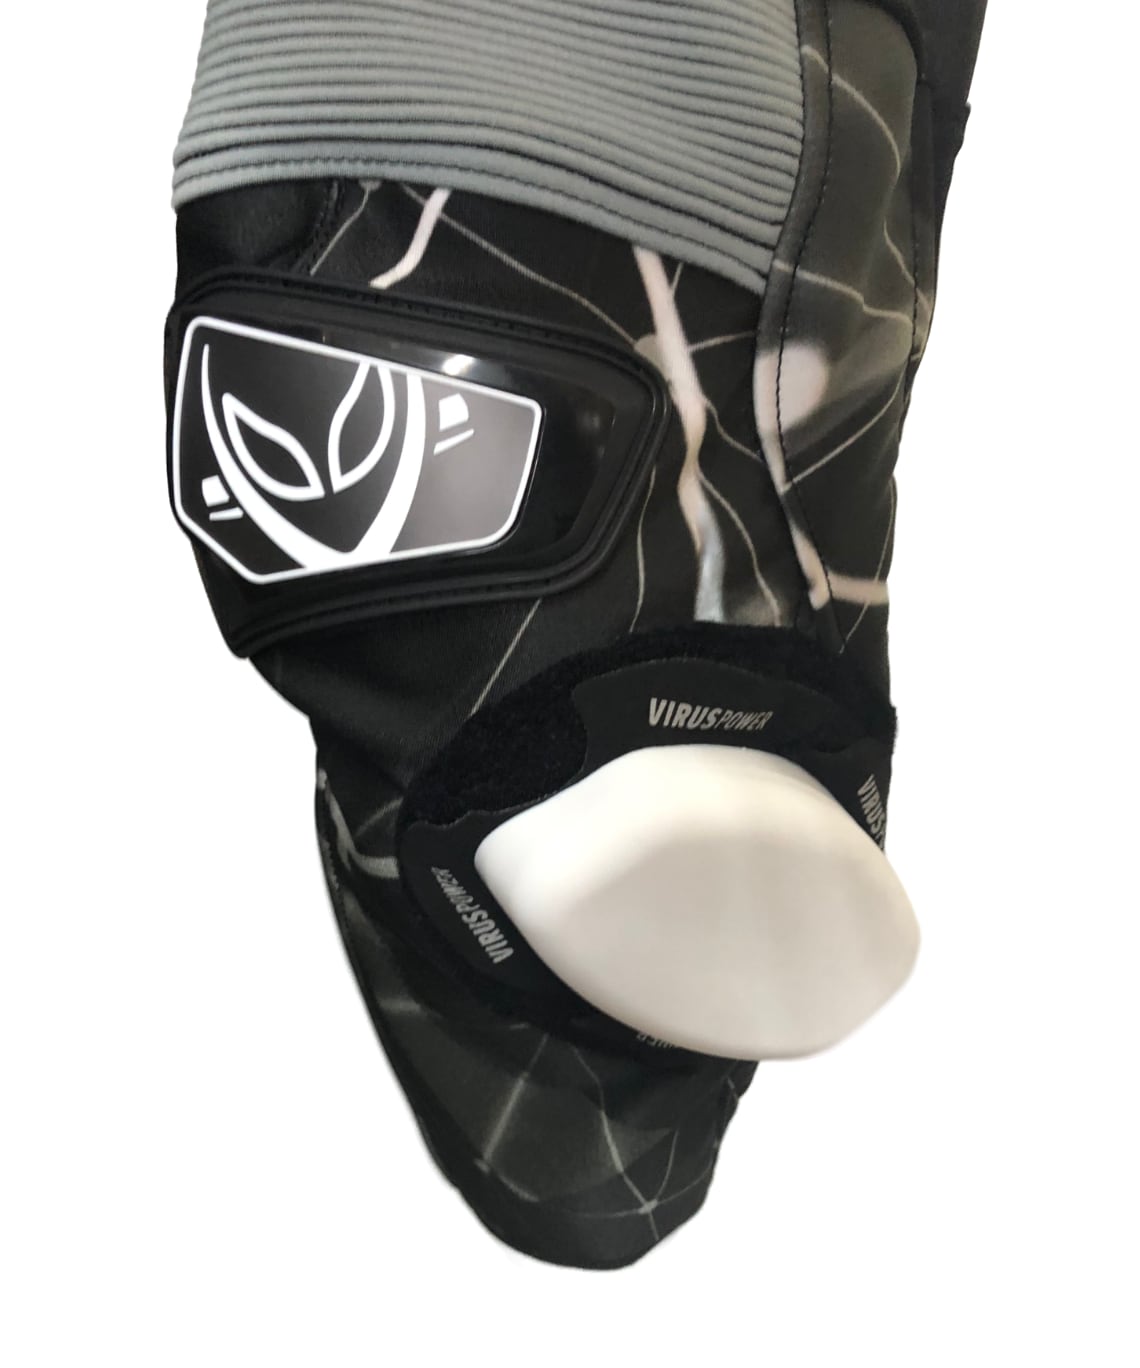 Raptor Racing Suit Leg And Knee Protection